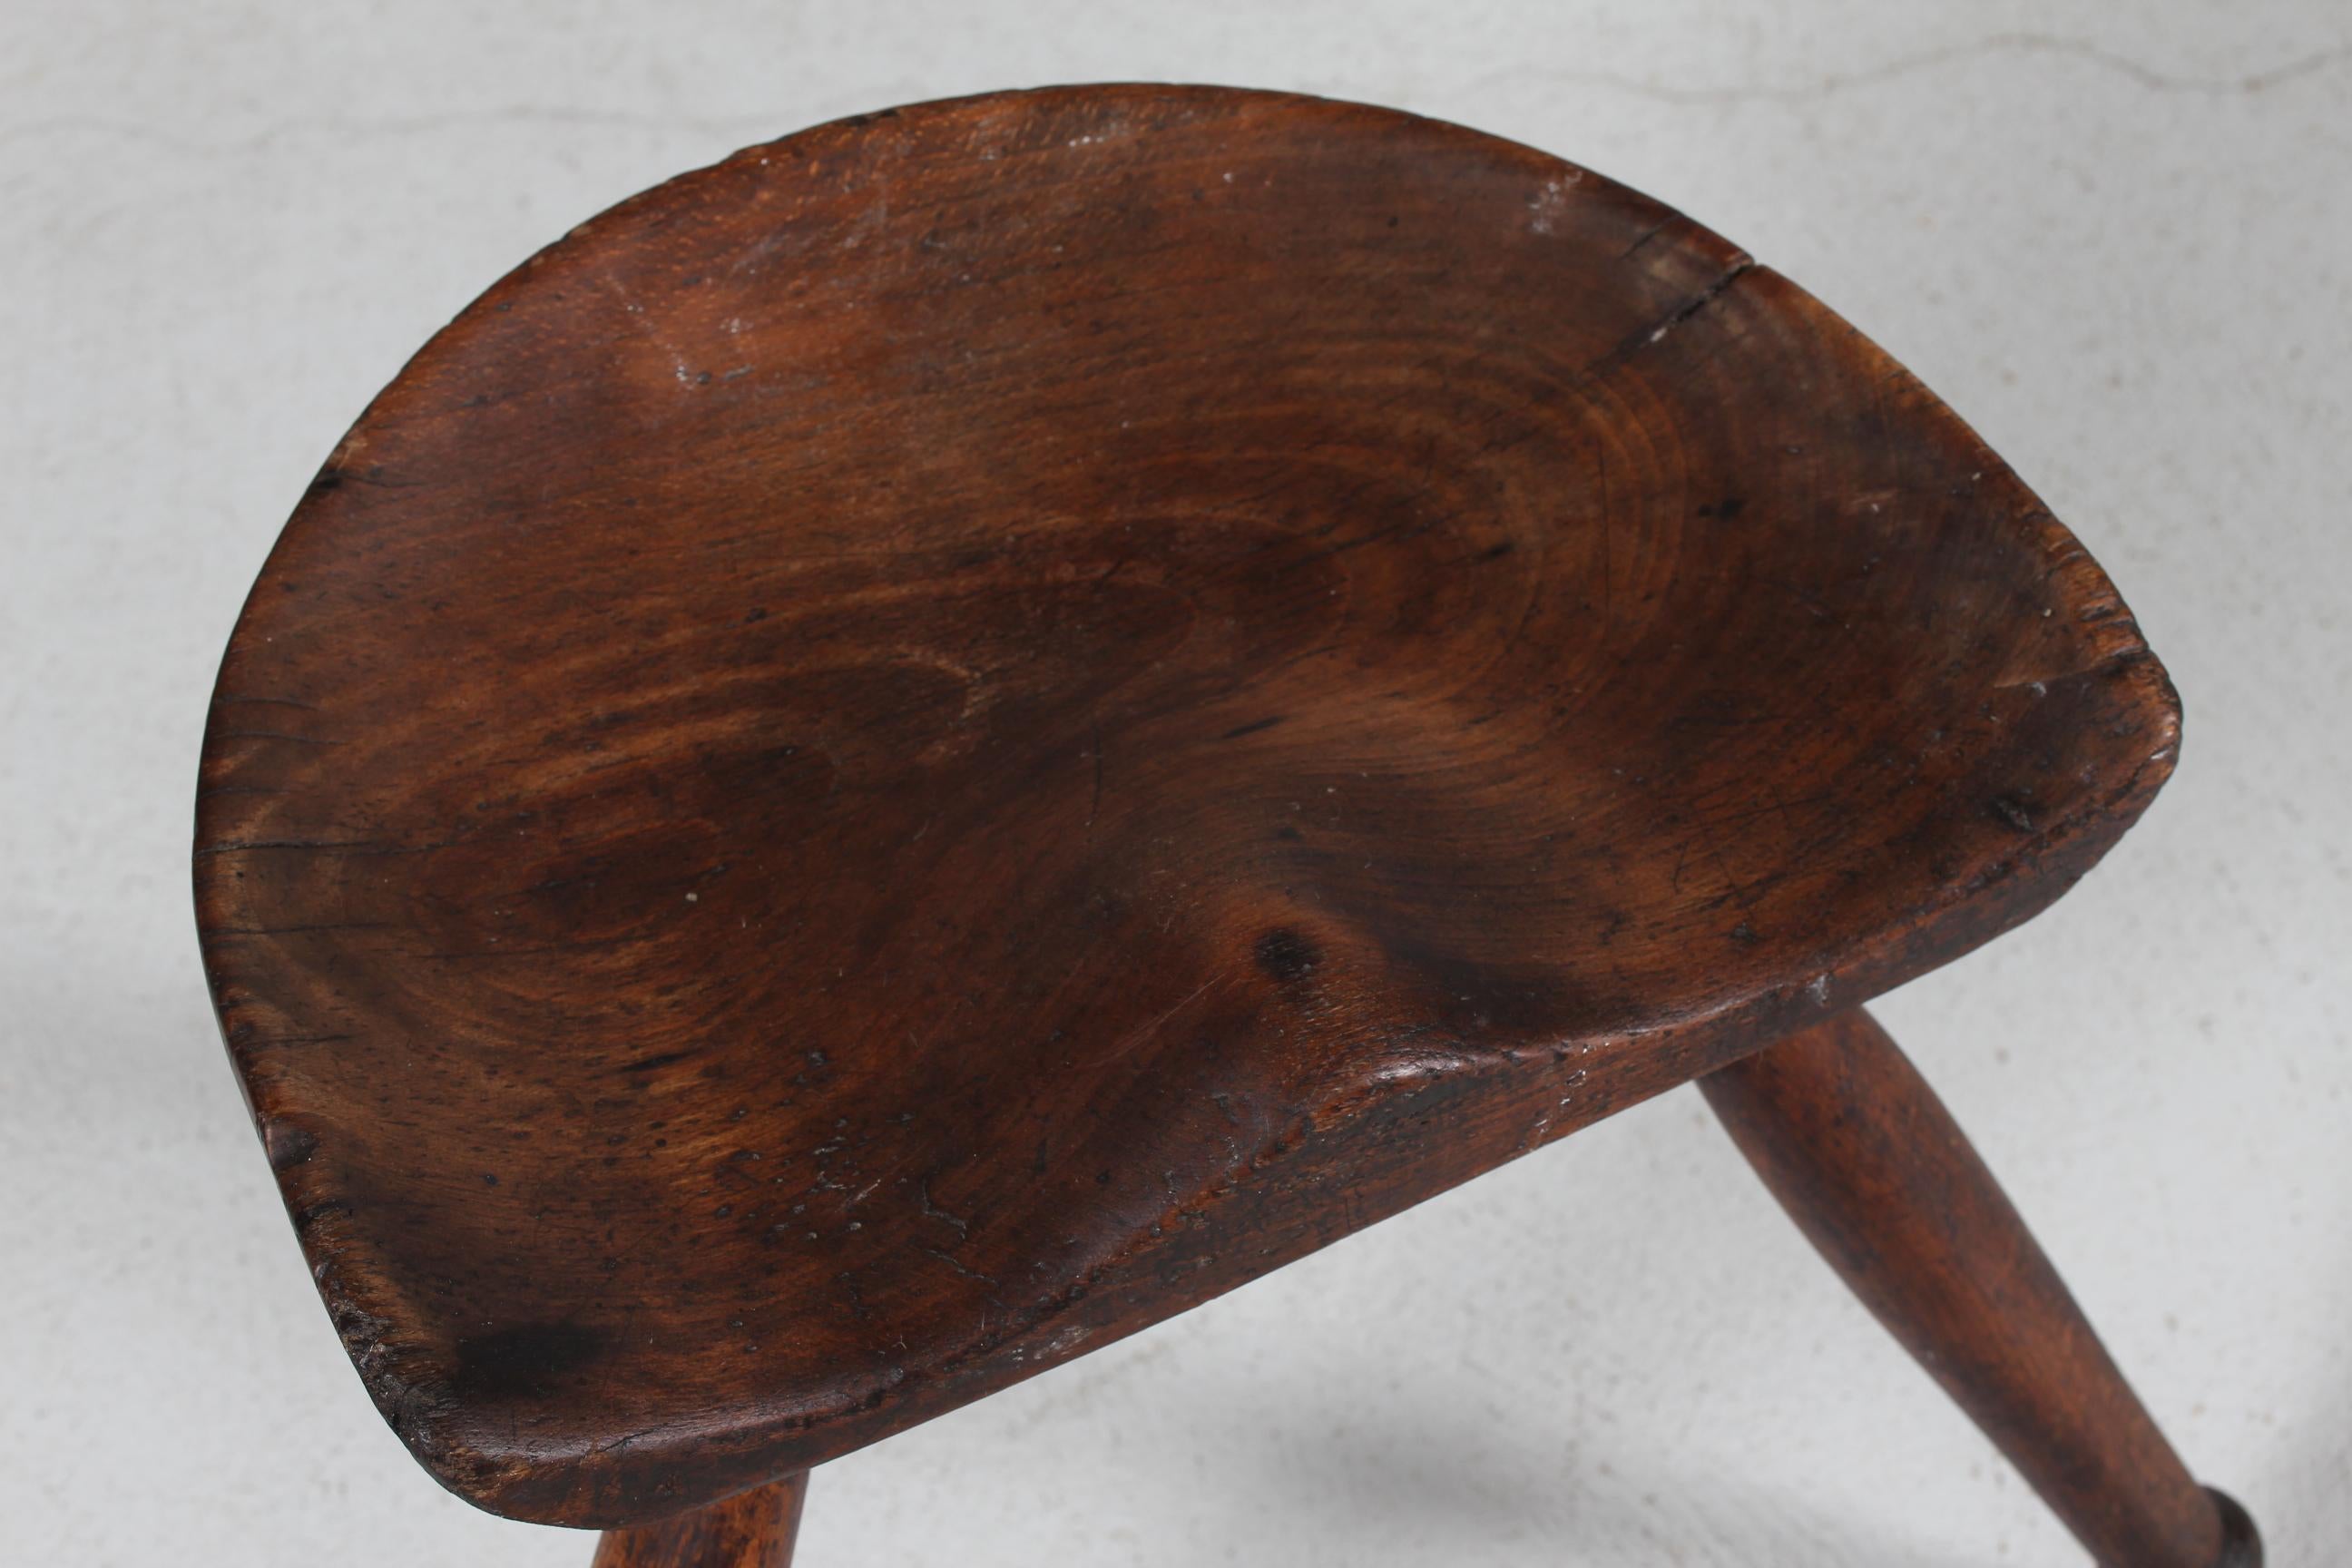 Antique Danish tripod milk stool made from solid darkened wood. Made ca 1920s by a cabinetmaker.
The seat is shaped for great comfort. This kind of seat might have inspired Mogens Lassen when he designed his stool.
Beautiful patina. A very